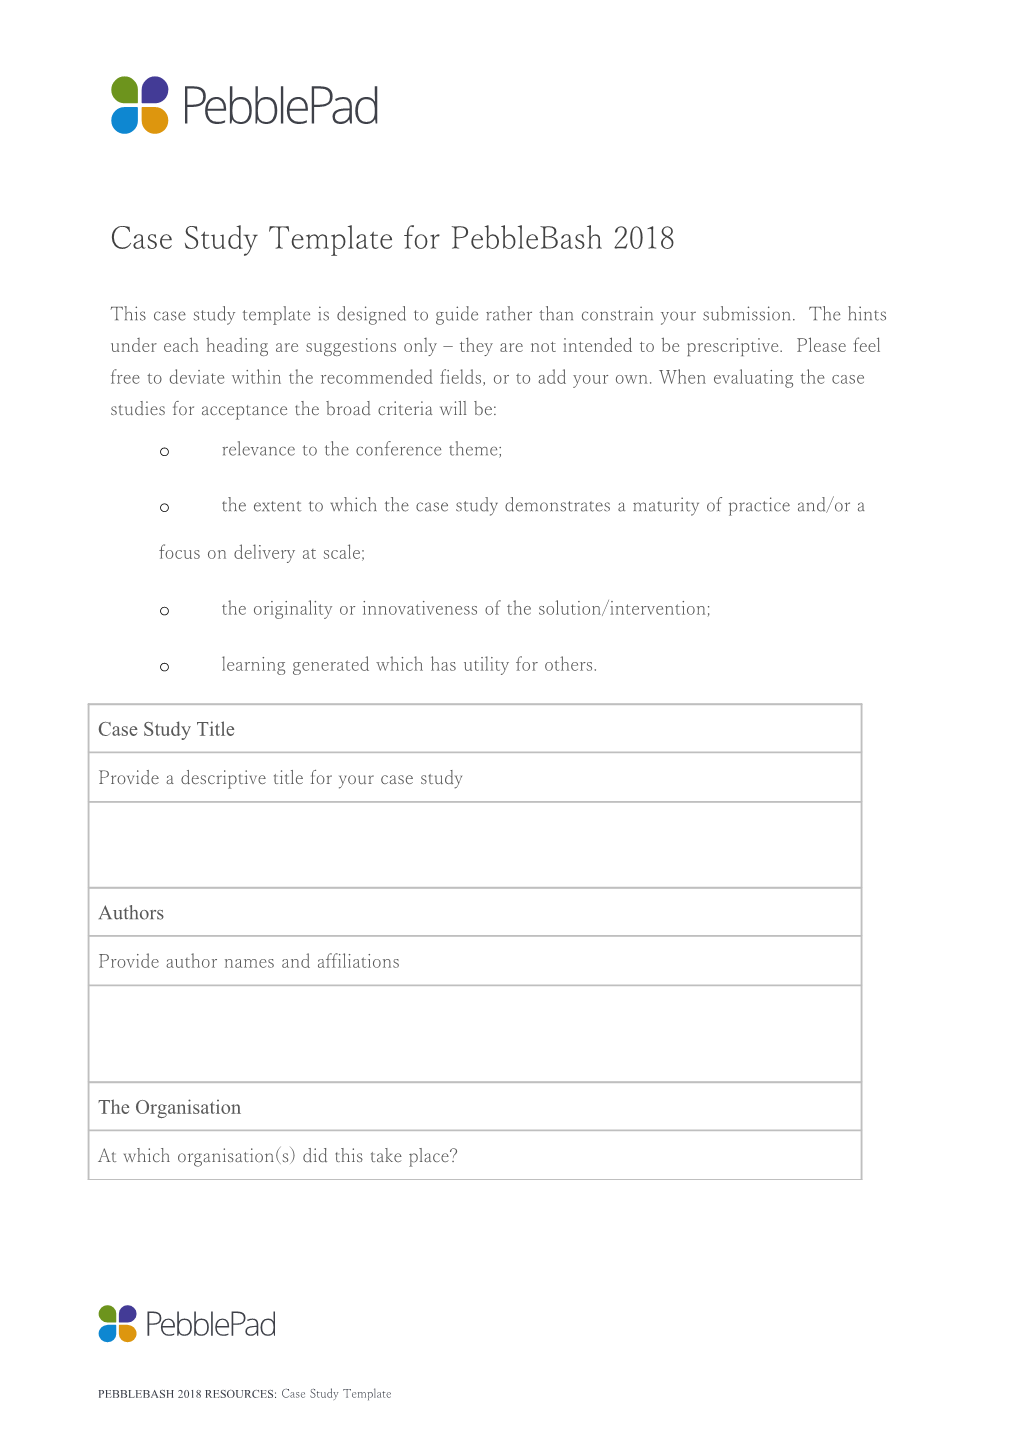 Case Study Template for Pebblebash 2018 This Case Study Template Is Designed to Guide Rather